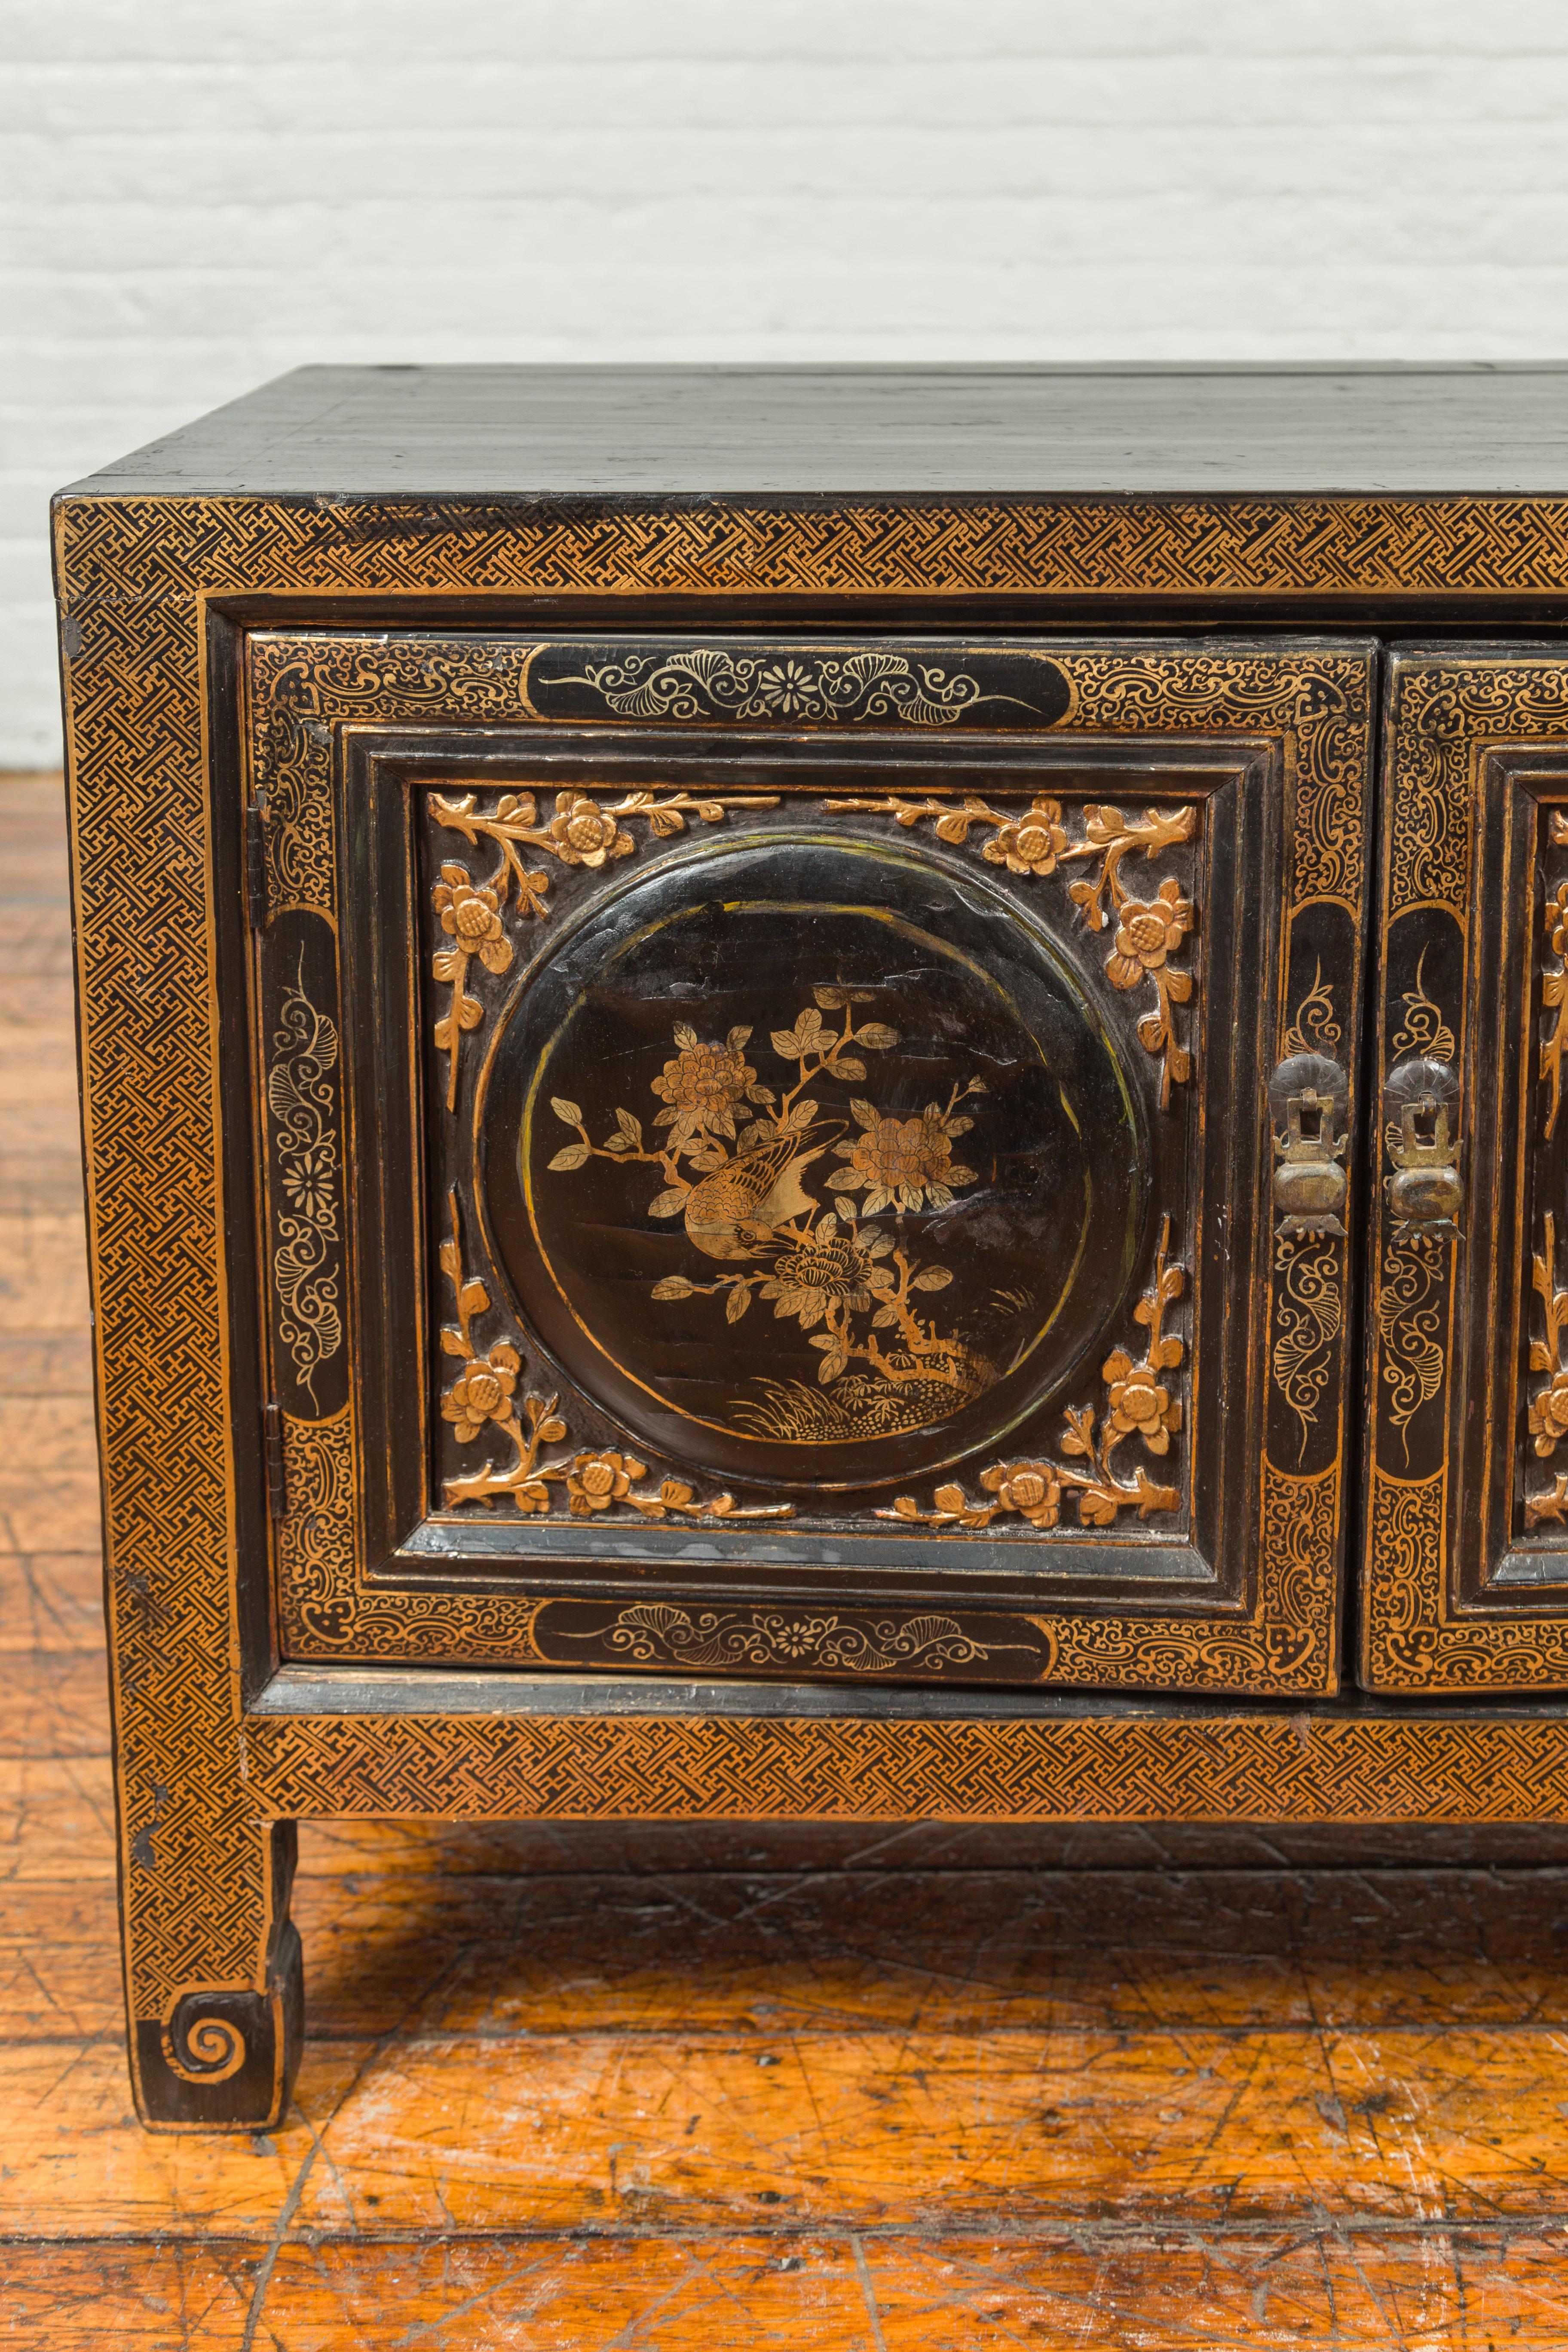 19th Century Chinese Antique Black and Gold Lacquered Cabinet with Floral and Bird Decor